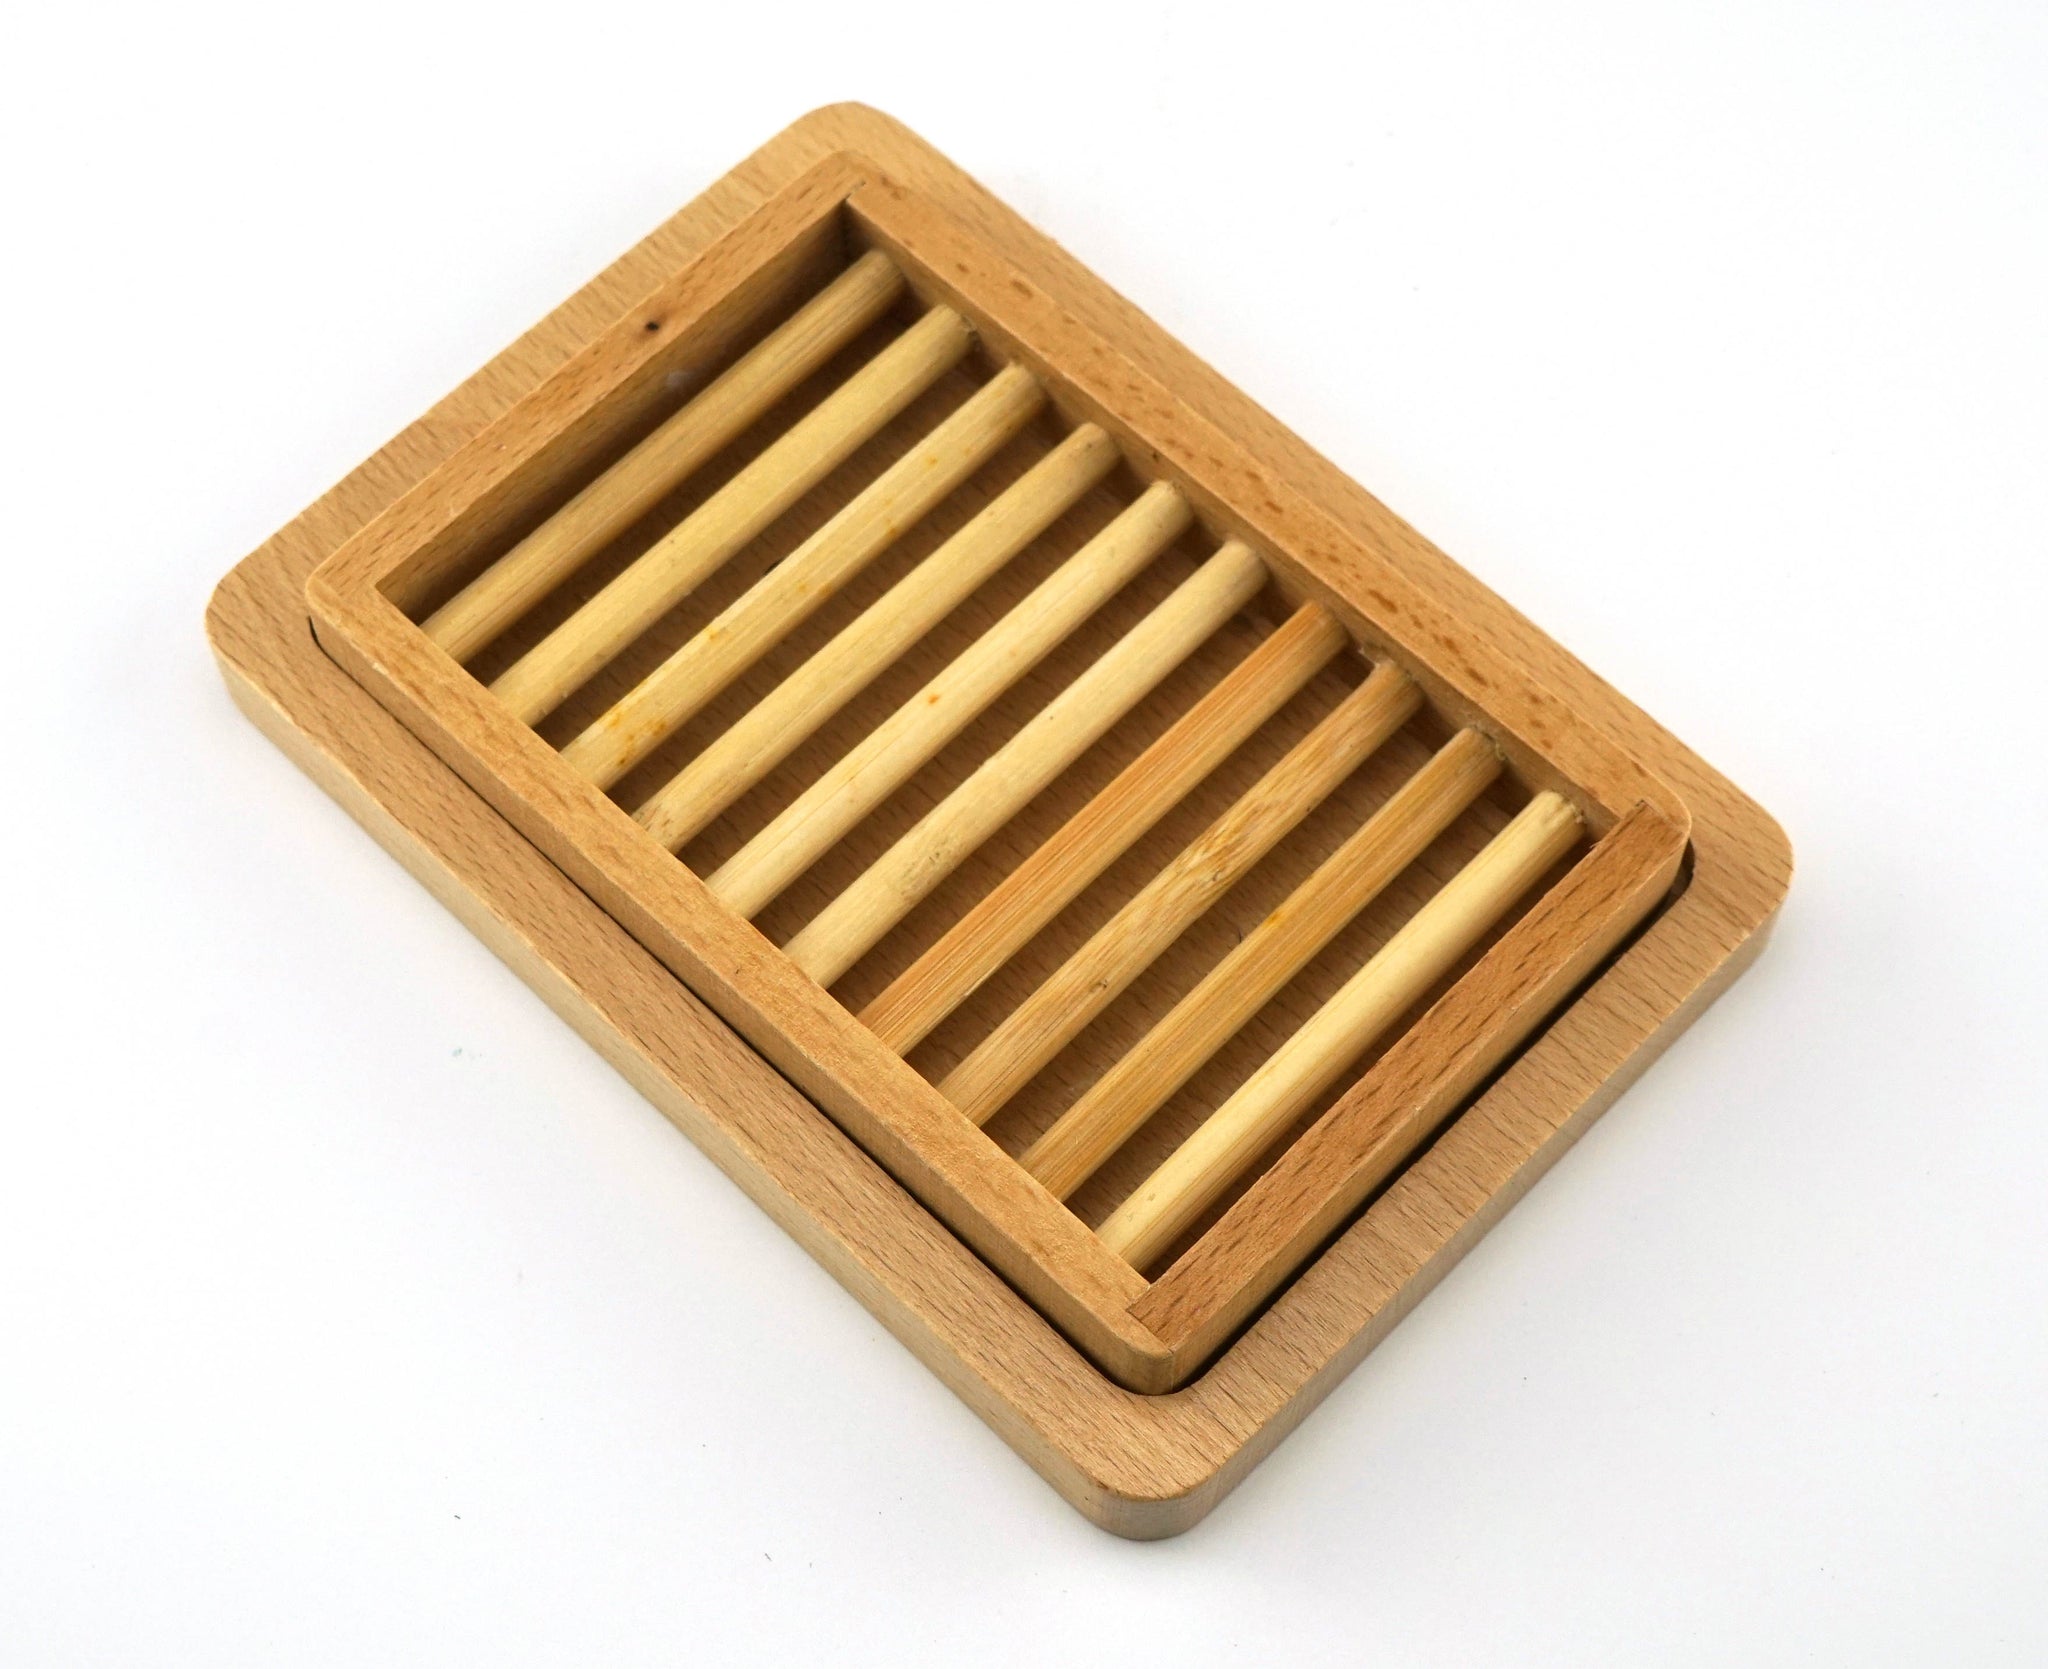  Anwenk Soap Dish Wooden Soap Saver Holder Soap Tray